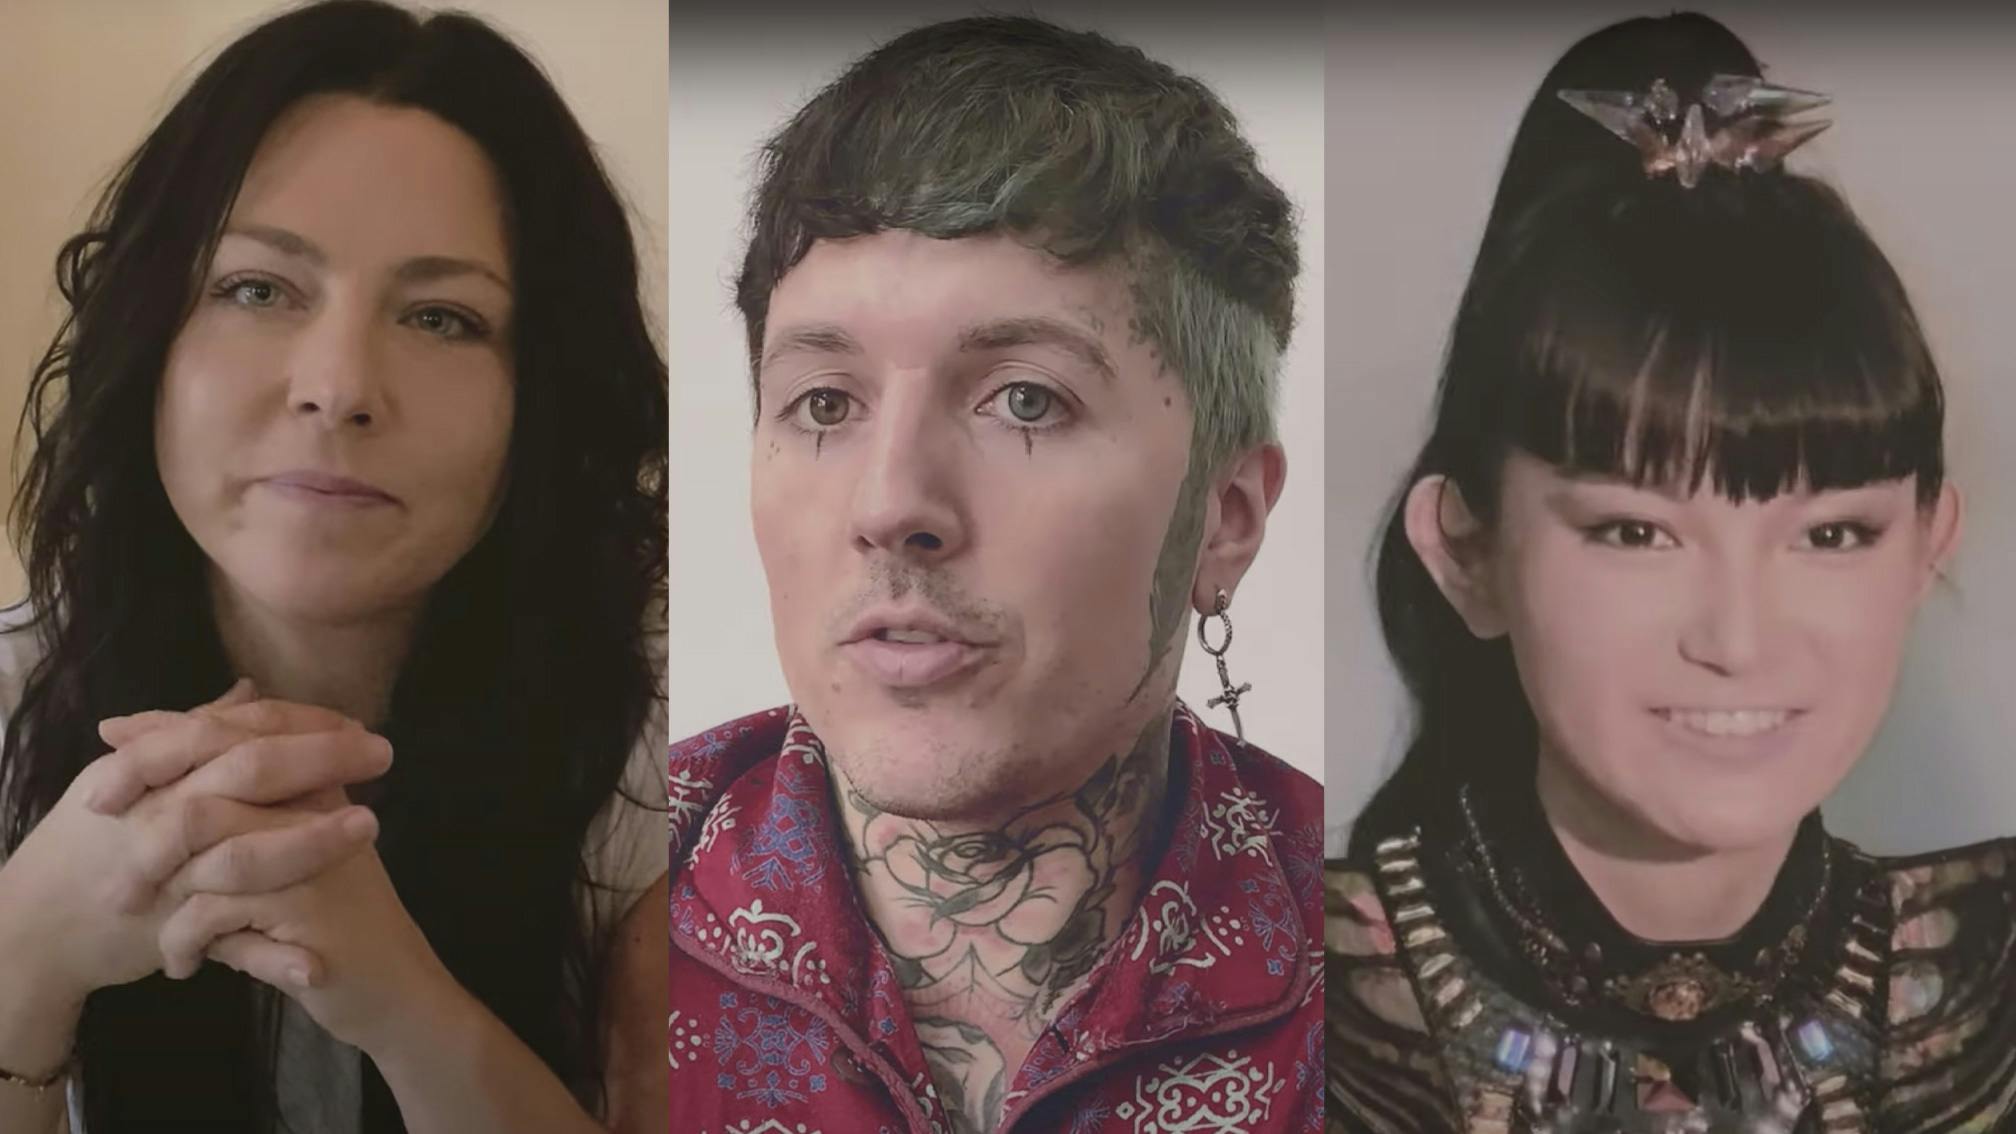 BMTH, Amy Lee, BABYMETAL and more reflect on what the pandemic has taught them